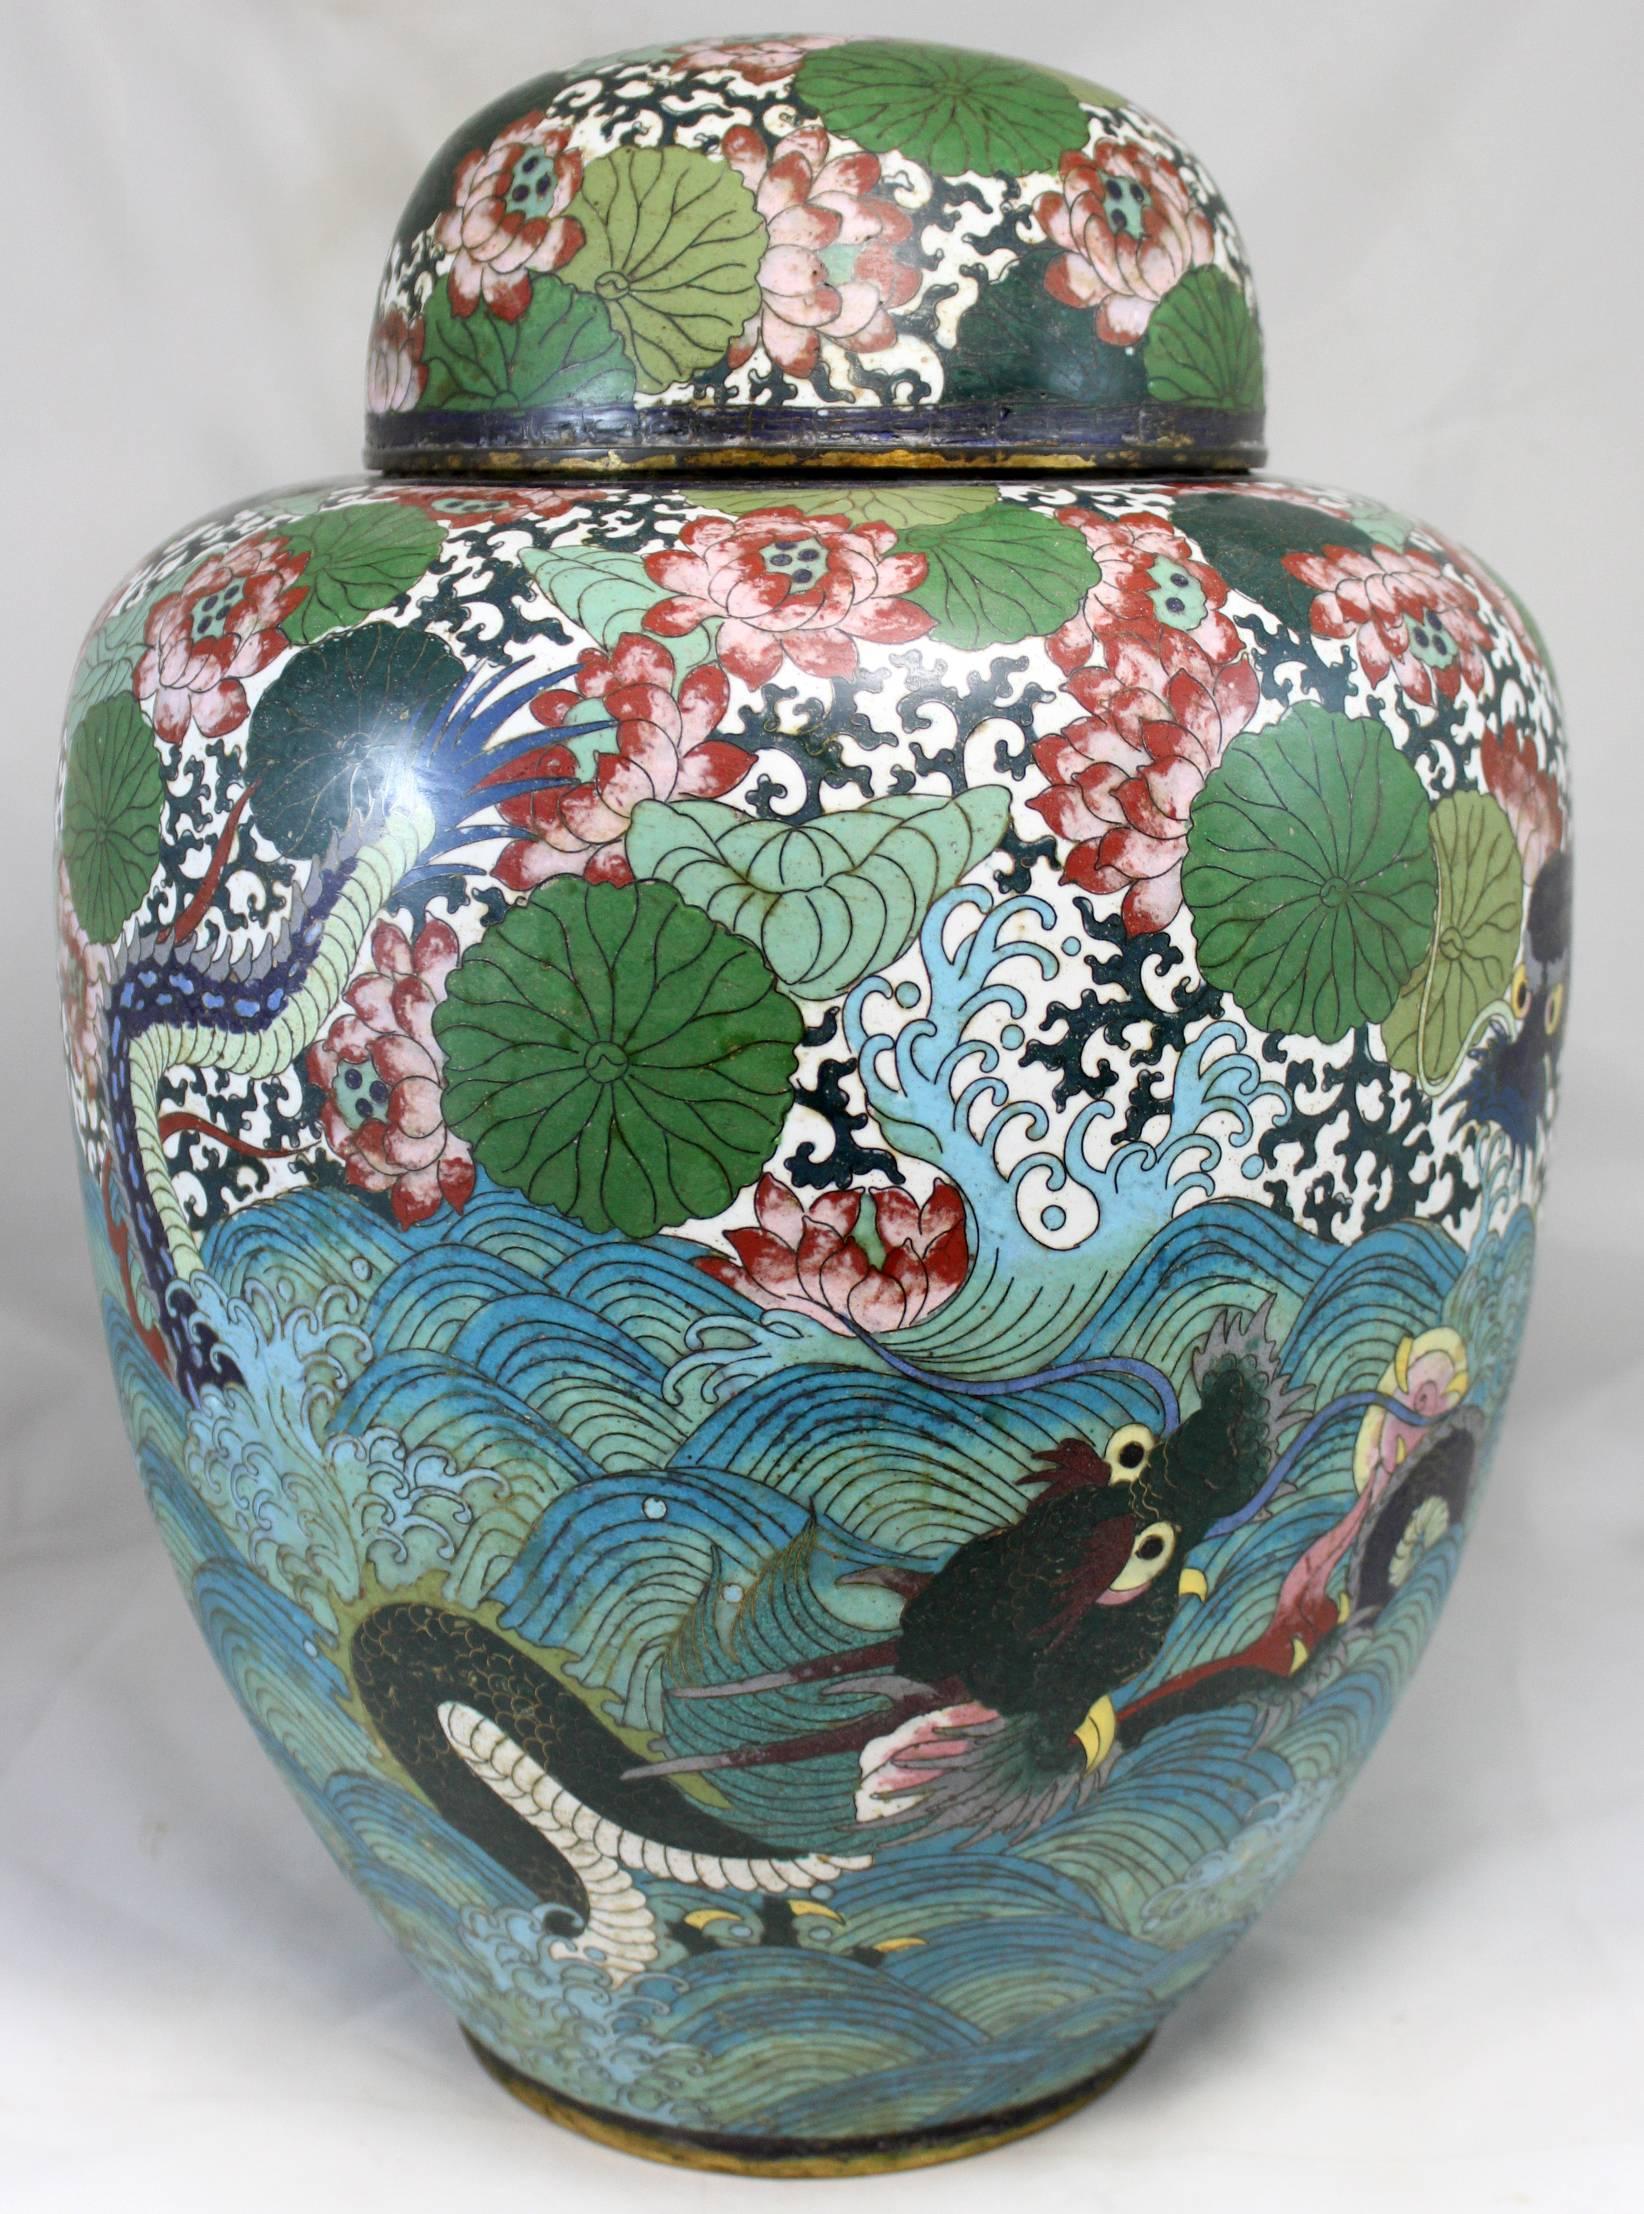 Large polychrome Chinese bronze or brass and hand-painted enamel cloisonné covered jar or urn with sea serpent decoration, as well as a variety of foliate decorations on the upper half and cover of the piece. Hand signed on base. Probably dates to